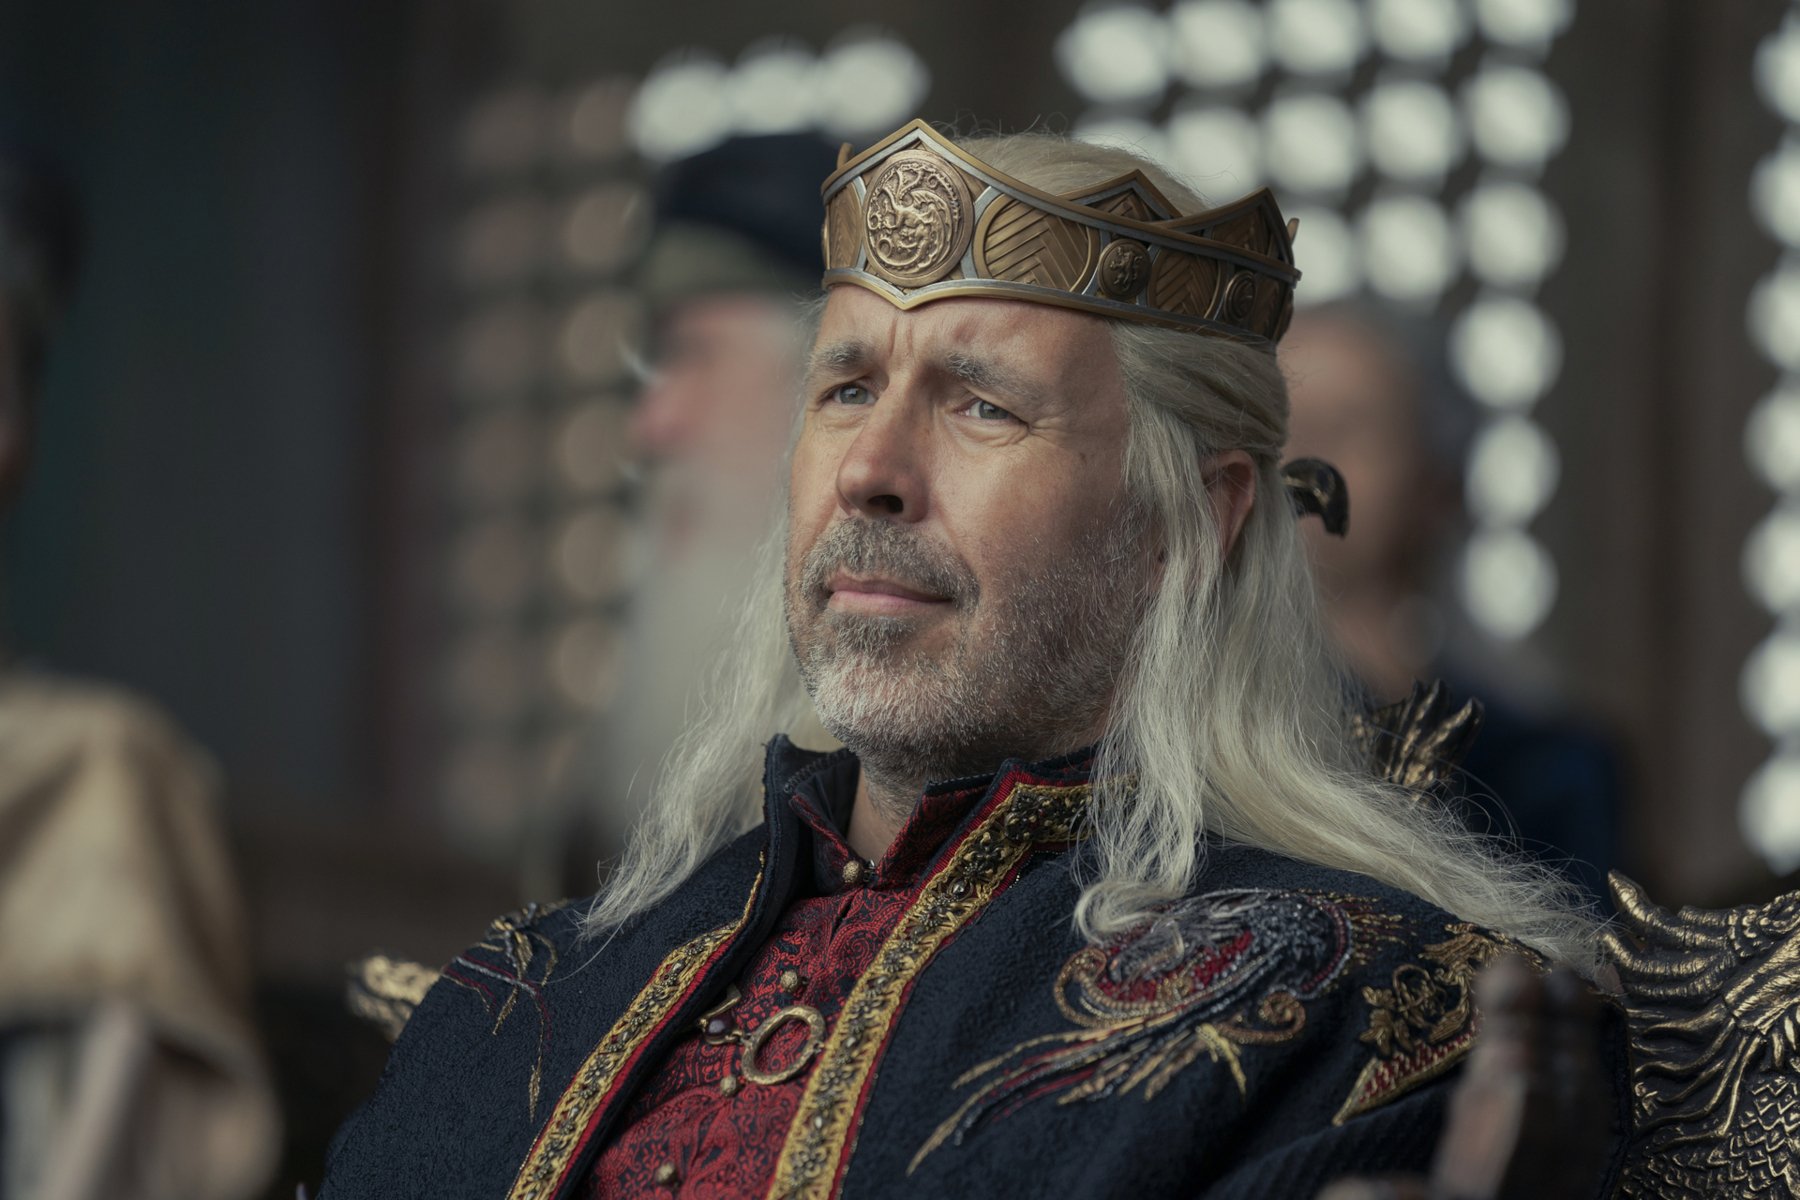 Paddy Considine as King Viserys in 'House of the Dragon,' which has repeatedly highlighted his illness. In the image, he's wearing his crown and looking at something off-screen.